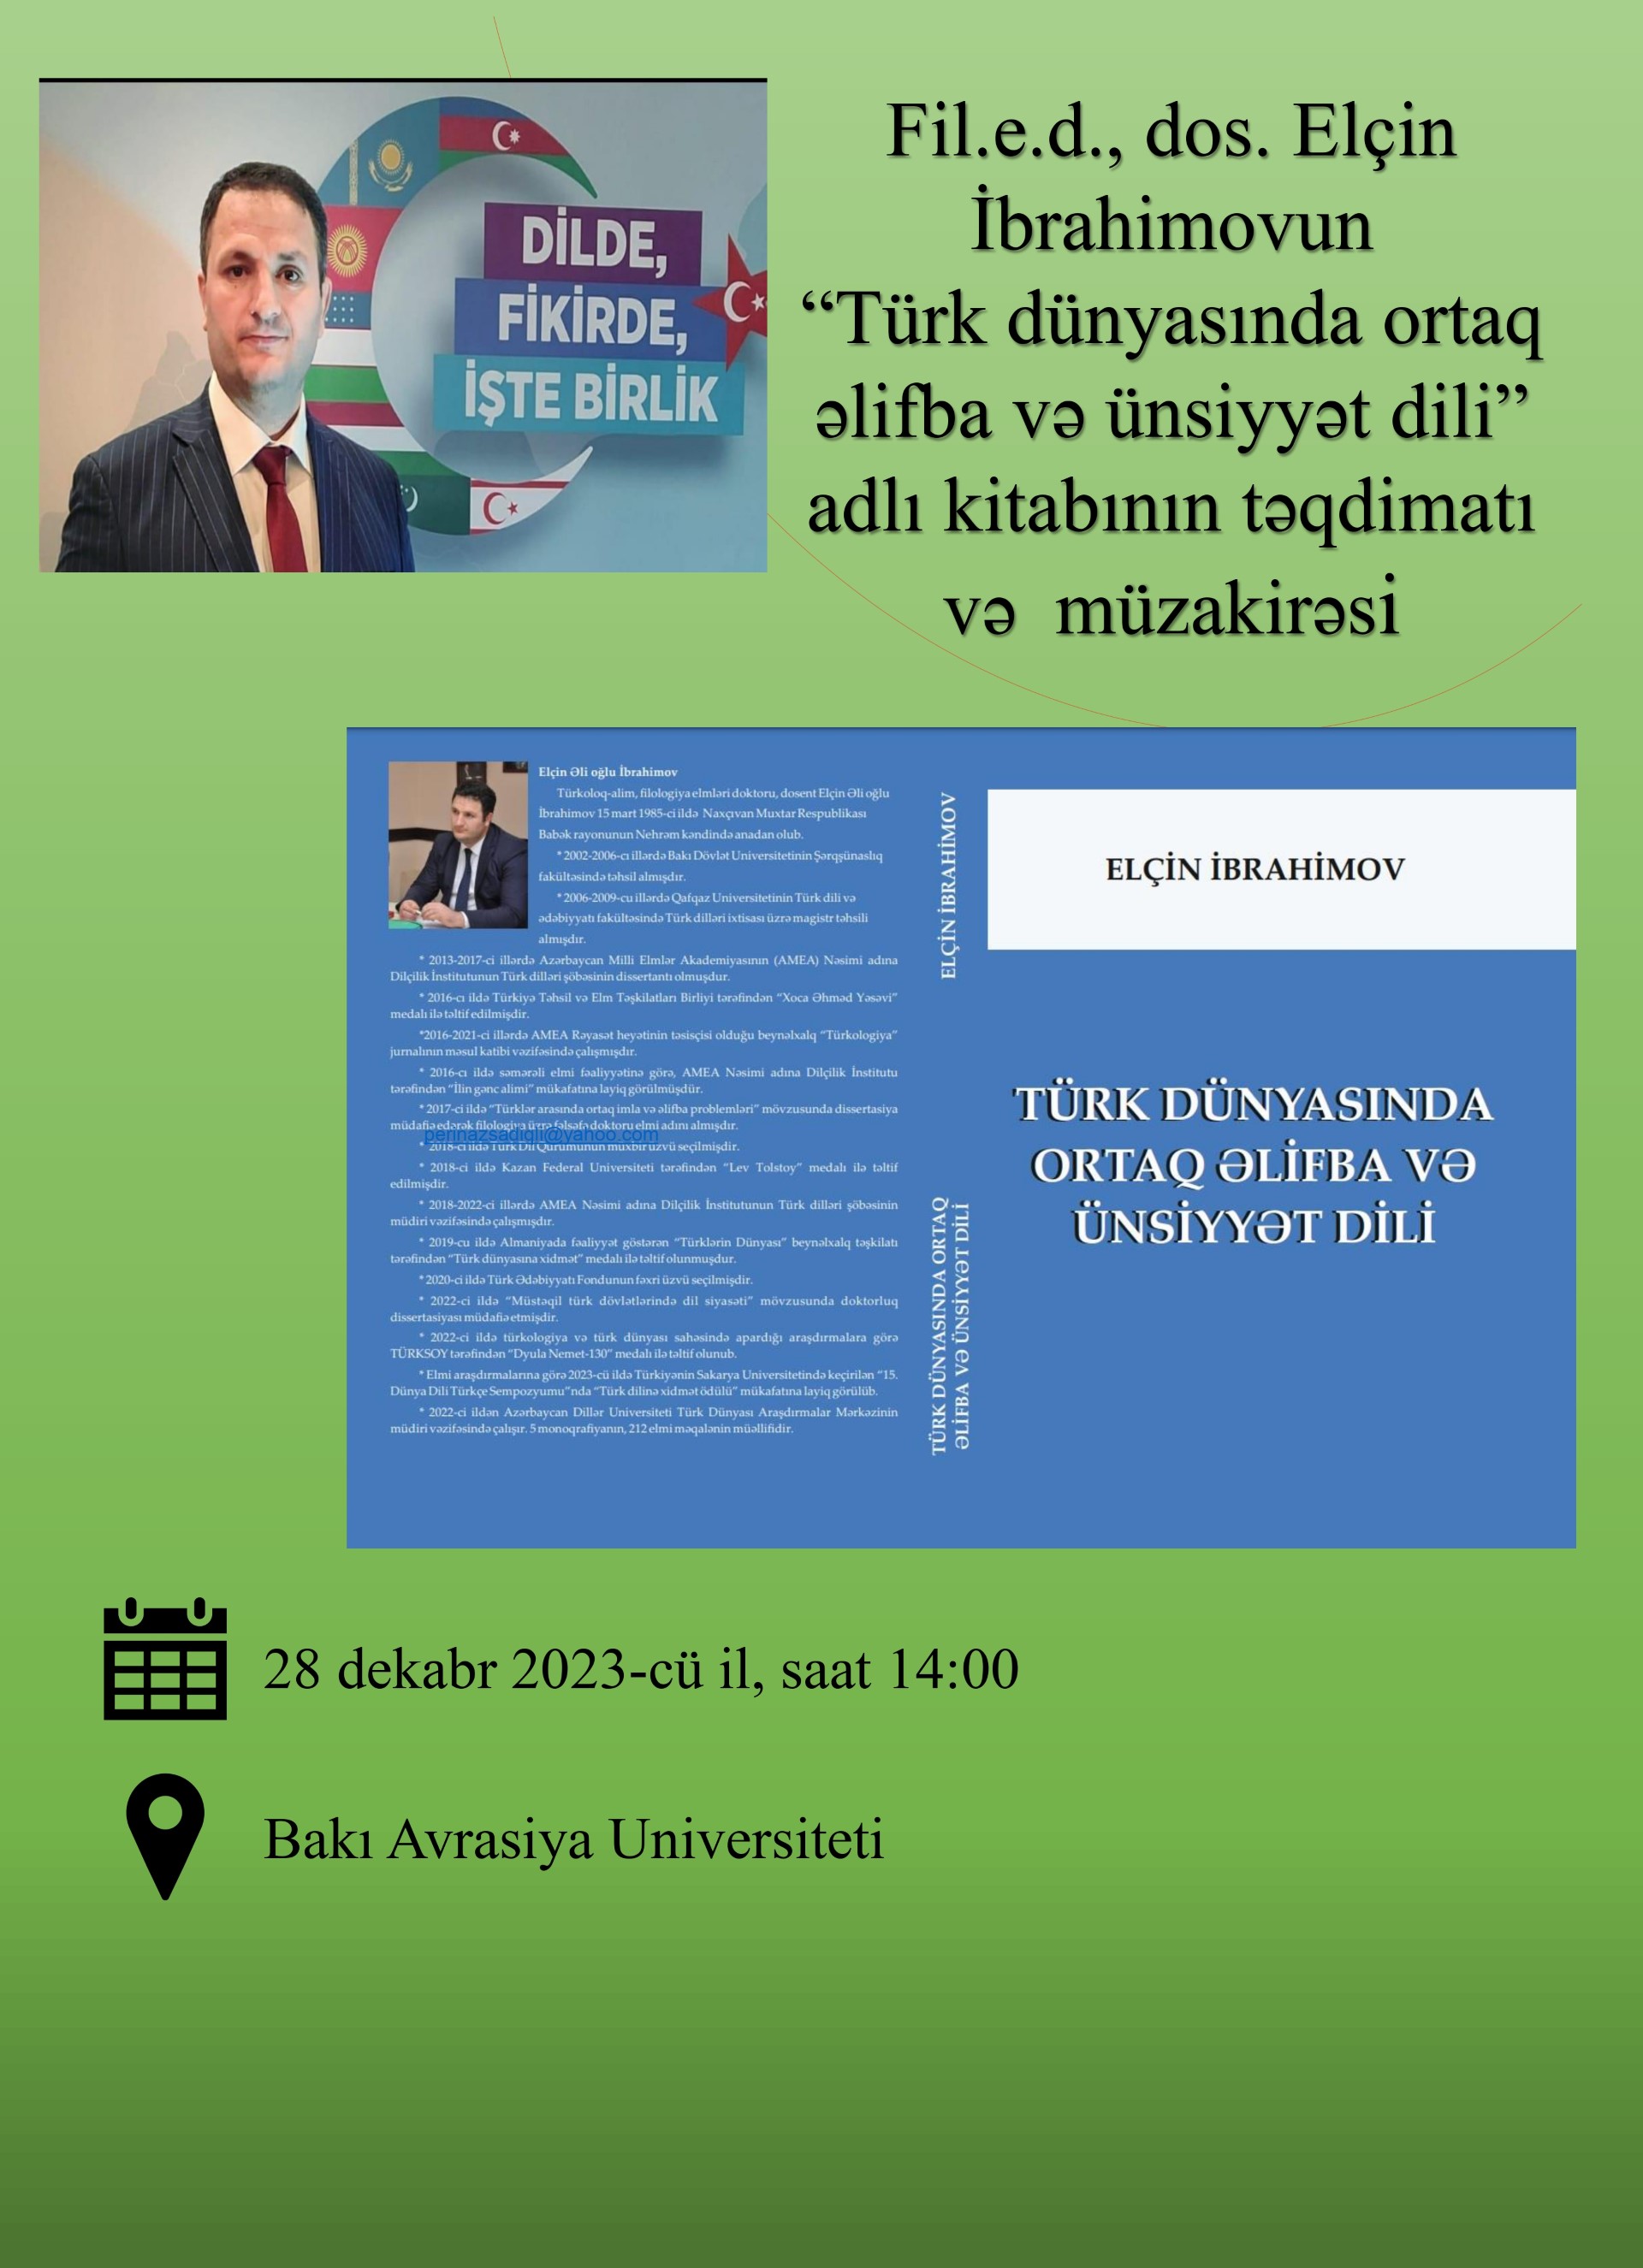 Presentation and discussion of Doctor of Philology, docent, Elchin Ibrahimov's book "Common alphabet and communication language in the Turkish world" will be held